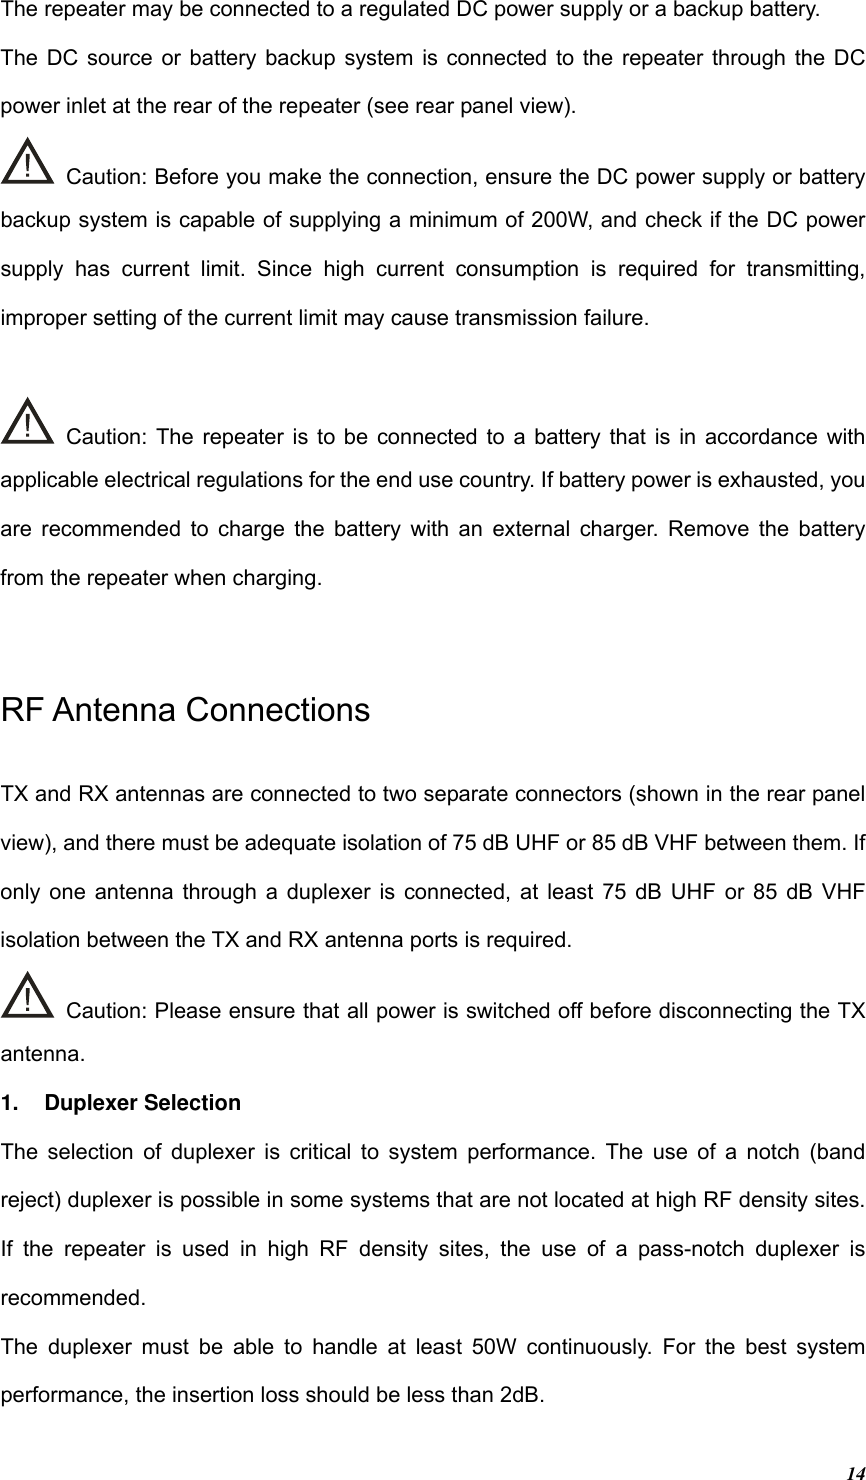 Page 15 of Hytera Communications RD98XSIU2 Digital Repeater User Manual RD98XS Owner s Manual 100202